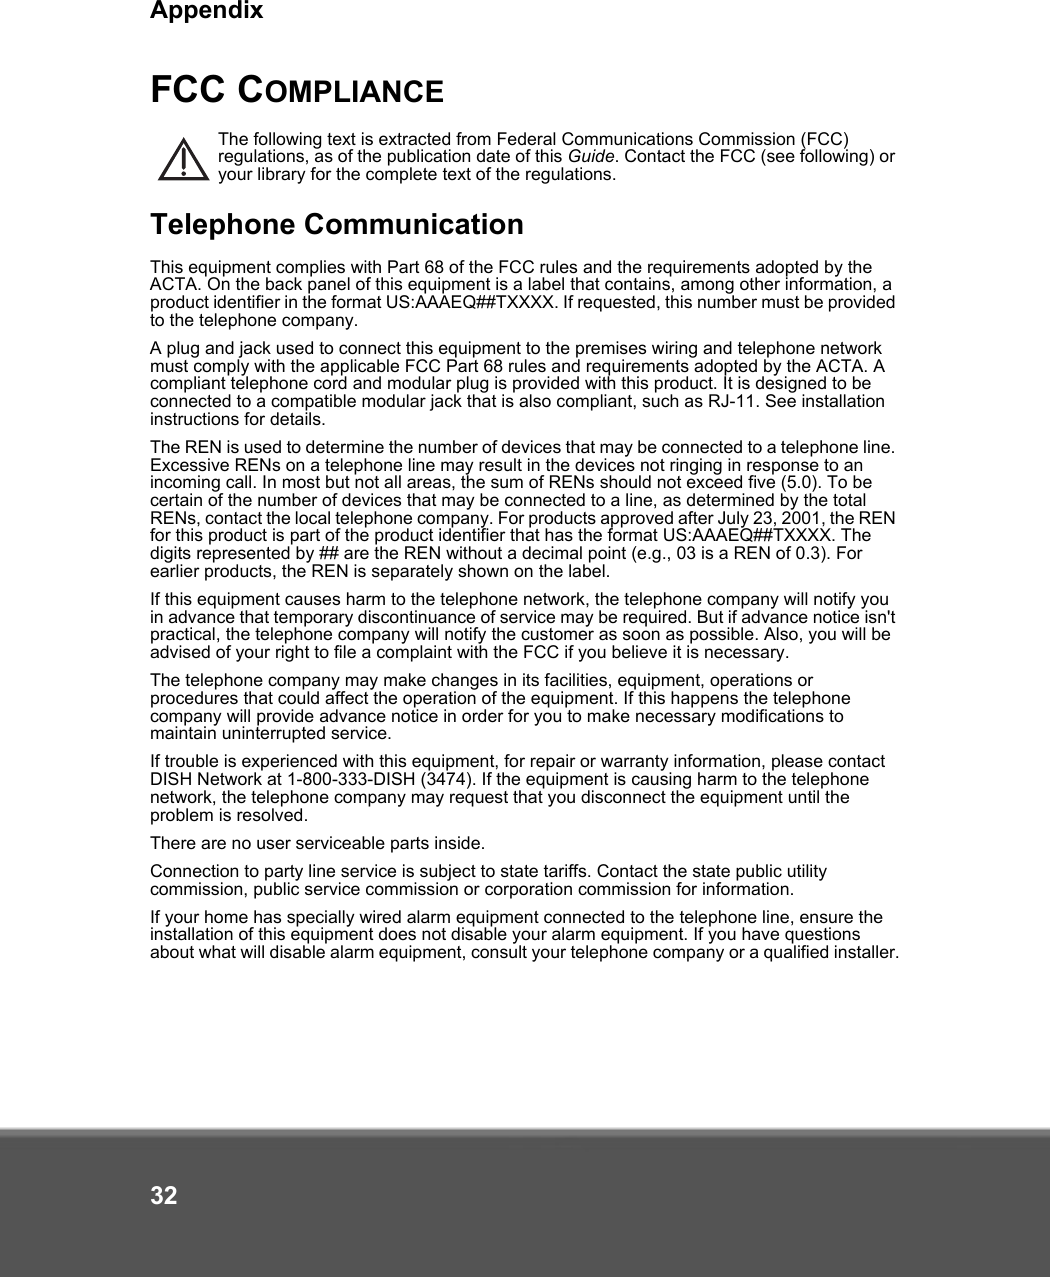 Appendix32FCC COMPLIANCEThe following text is extracted from Federal Communications Commission (FCC) regulations, as of the publication date of this Guide. Contact the FCC (see following) or your library for the complete text of the regulations.Telephone CommunicationThis equipment complies with Part 68 of the FCC rules and the requirements adopted by the ACTA. On the back panel of this equipment is a label that contains, among other information, a product identifier in the format US:AAAEQ##TXXXX. If requested, this number must be provided to the telephone company.A plug and jack used to connect this equipment to the premises wiring and telephone network must comply with the applicable FCC Part 68 rules and requirements adopted by the ACTA. A compliant telephone cord and modular plug is provided with this product. It is designed to be connected to a compatible modular jack that is also compliant, such as RJ-11. See installation instructions for details.The REN is used to determine the number of devices that may be connected to a telephone line. Excessive RENs on a telephone line may result in the devices not ringing in response to an incoming call. In most but not all areas, the sum of RENs should not exceed five (5.0). To be certain of the number of devices that may be connected to a line, as determined by the total RENs, contact the local telephone company. For products approved after July 23, 2001, the REN for this product is part of the product identifier that has the format US:AAAEQ##TXXXX. The digits represented by ## are the REN without a decimal point (e.g., 03 is a REN of 0.3). For earlier products, the REN is separately shown on the label.If this equipment causes harm to the telephone network, the telephone company will notify you in advance that temporary discontinuance of service may be required. But if advance notice isn&apos;t practical, the telephone company will notify the customer as soon as possible. Also, you will be advised of your right to file a complaint with the FCC if you believe it is necessary.The telephone company may make changes in its facilities, equipment, operations or procedures that could affect the operation of the equipment. If this happens the telephone company will provide advance notice in order for you to make necessary modifications to maintain uninterrupted service.If trouble is experienced with this equipment, for repair or warranty information, please contact DISH Network at 1-800-333-DISH (3474). If the equipment is causing harm to the telephone network, the telephone company may request that you disconnect the equipment until the problem is resolved.There are no user serviceable parts inside. Connection to party line service is subject to state tariffs. Contact the state public utility commission, public service commission or corporation commission for information.If your home has specially wired alarm equipment connected to the telephone line, ensure the installation of this equipment does not disable your alarm equipment. If you have questions about what will disable alarm equipment, consult your telephone company or a qualified installer.